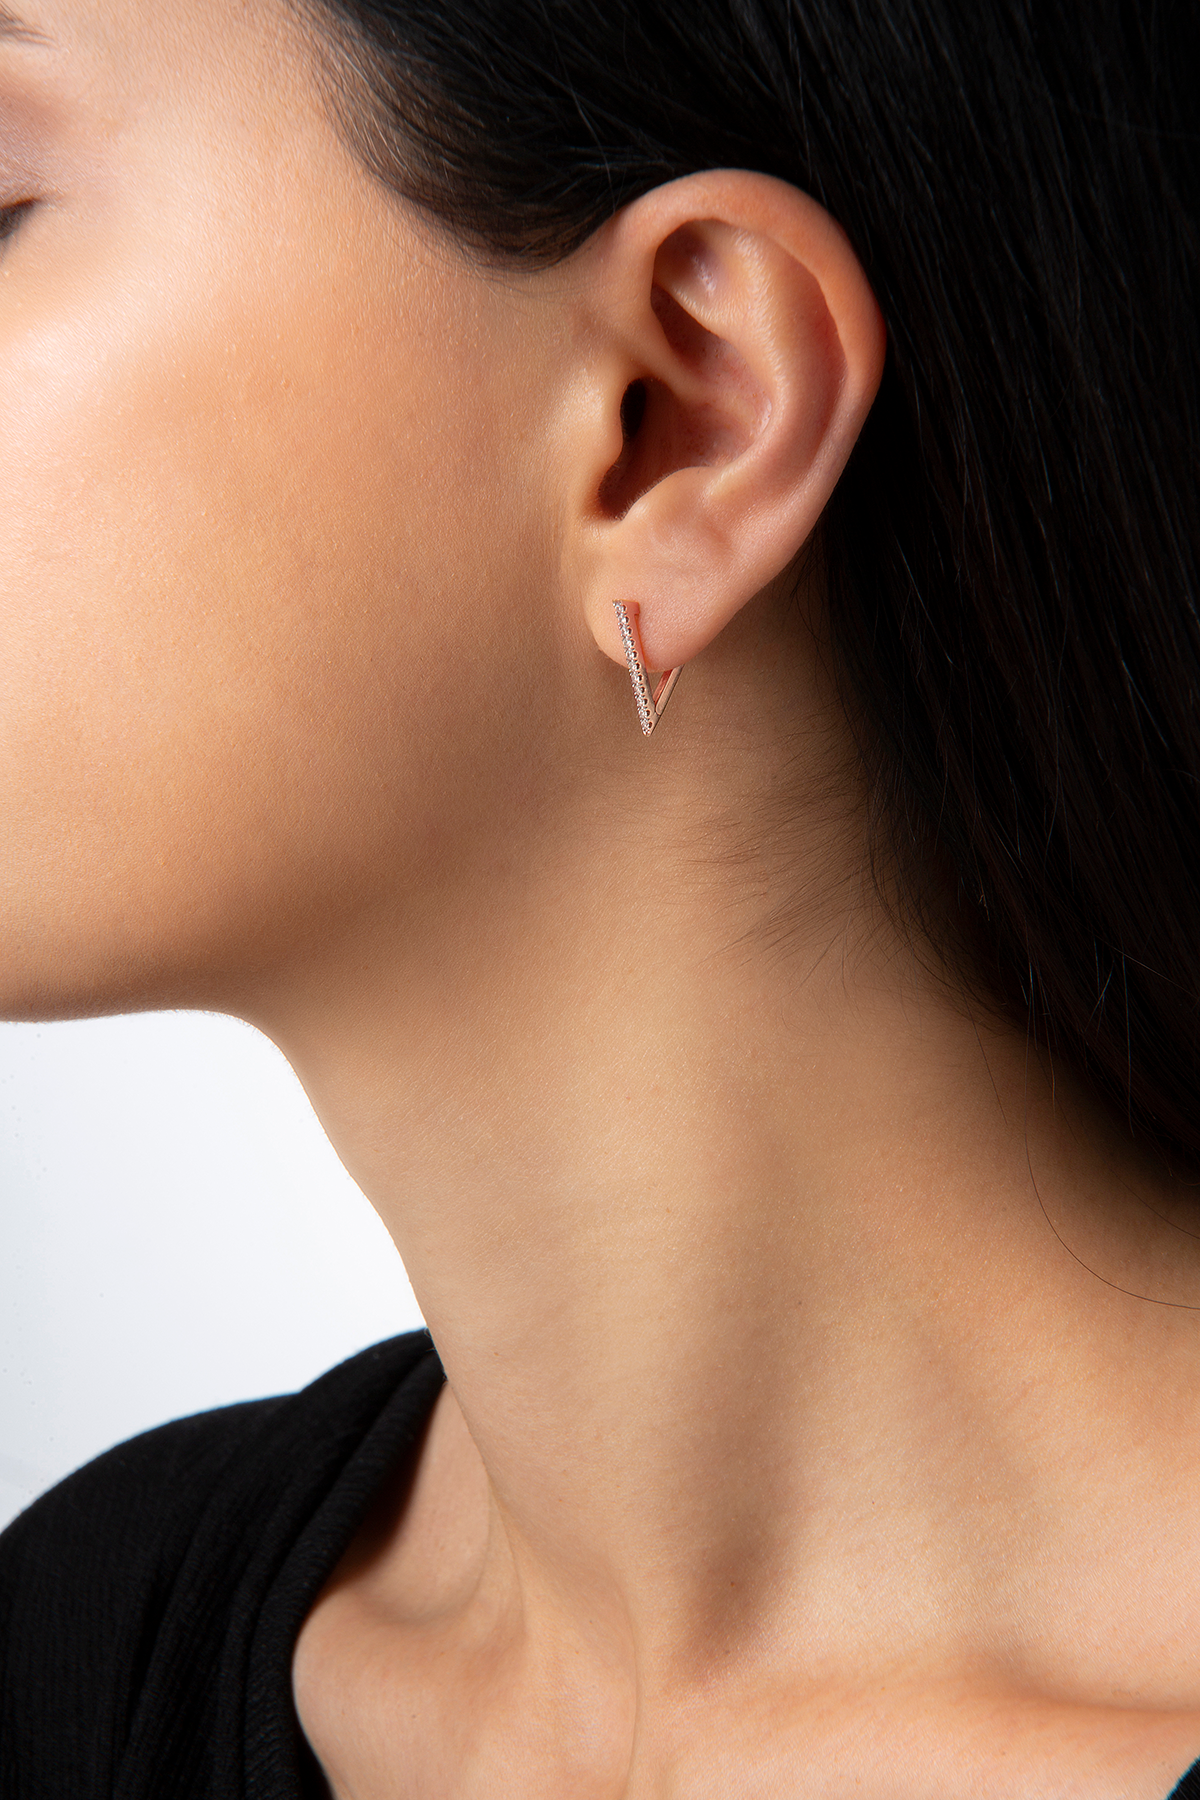 Mini Triangle Earring in Rose Gold - Her Story Shop